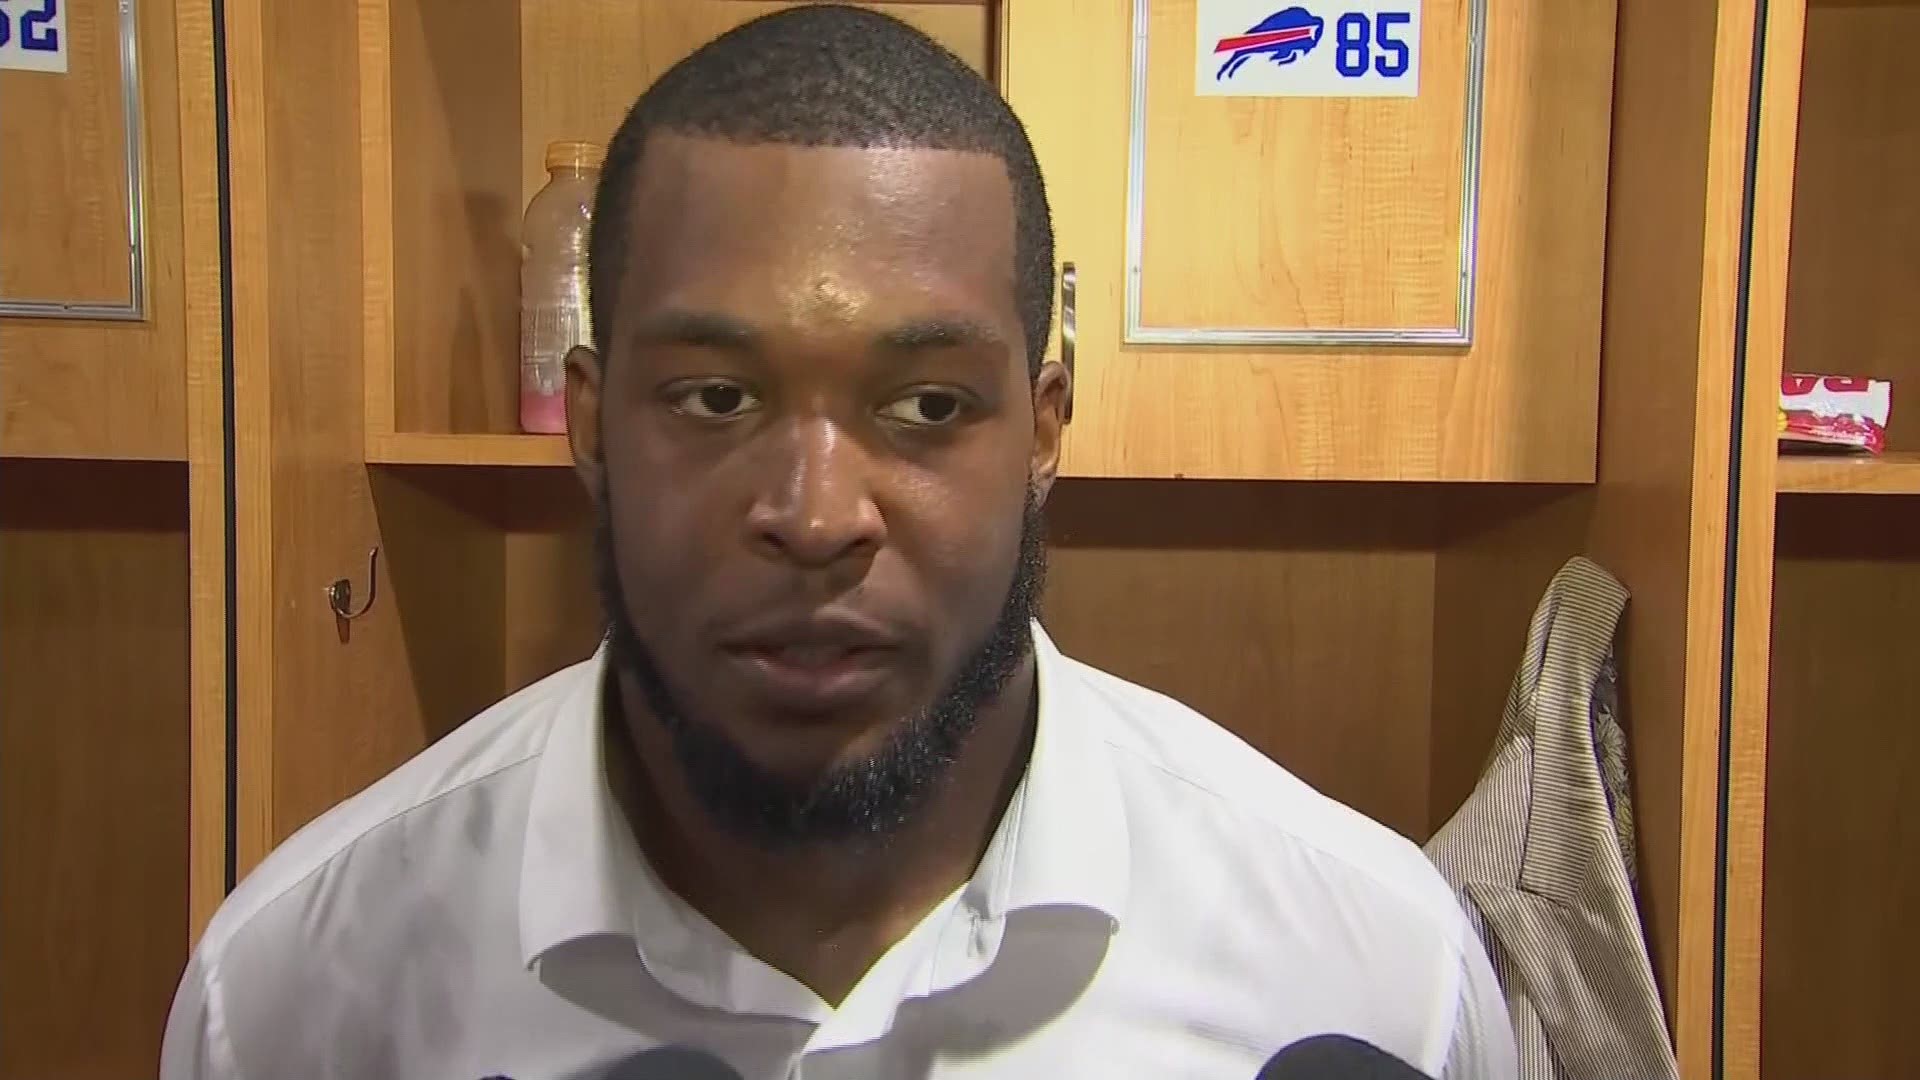 The Bills discuss their 21-17 loss to the Dolphins in Miami Sunday afternoon.